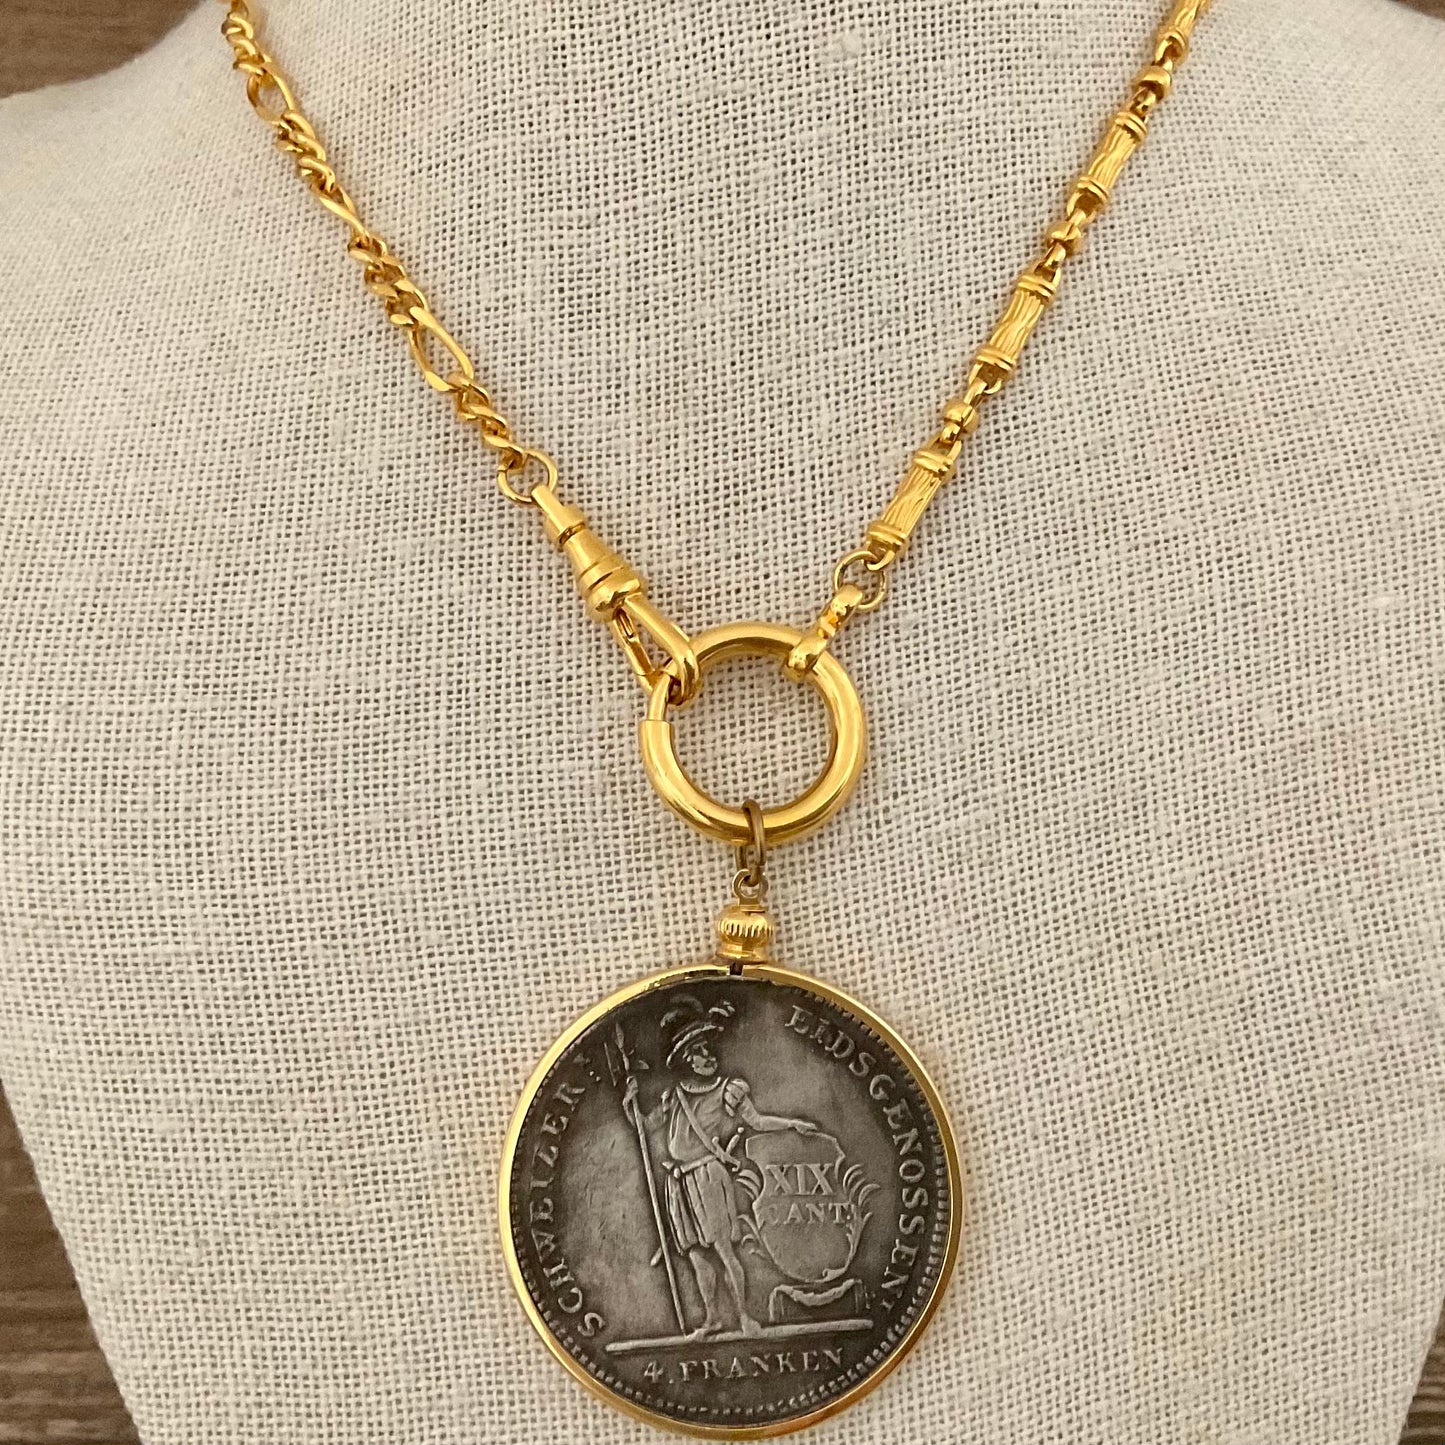 Vintage Gold Chain with Vintage Coin